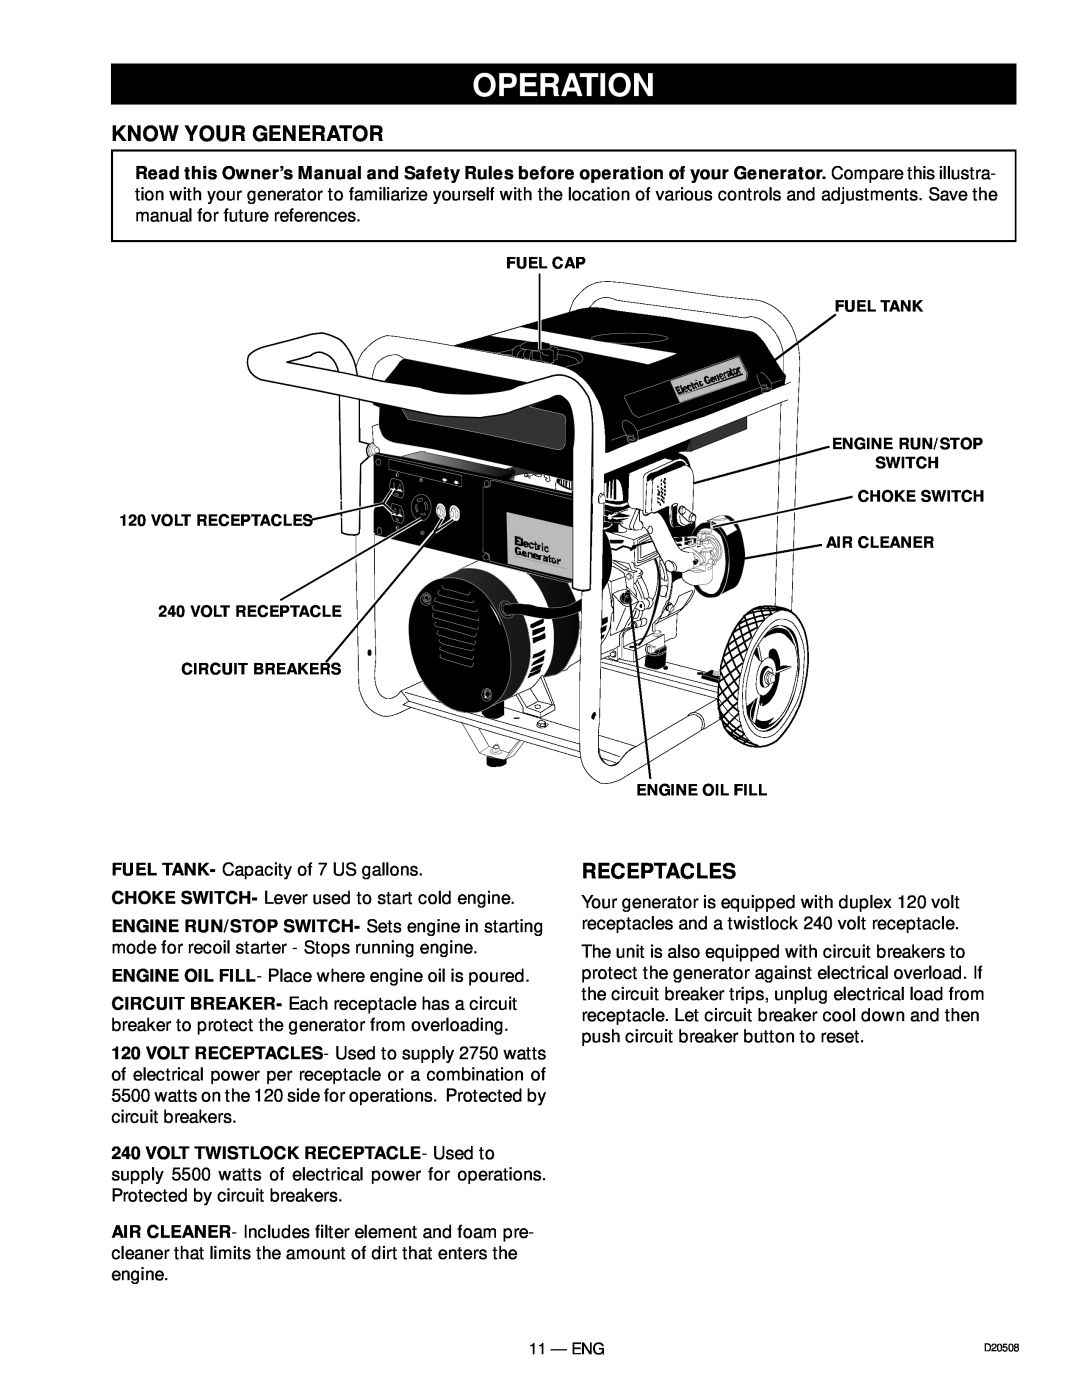 Sears 919.329110, D20508 owner manual Operation, Know Your Generator, Receptacles 